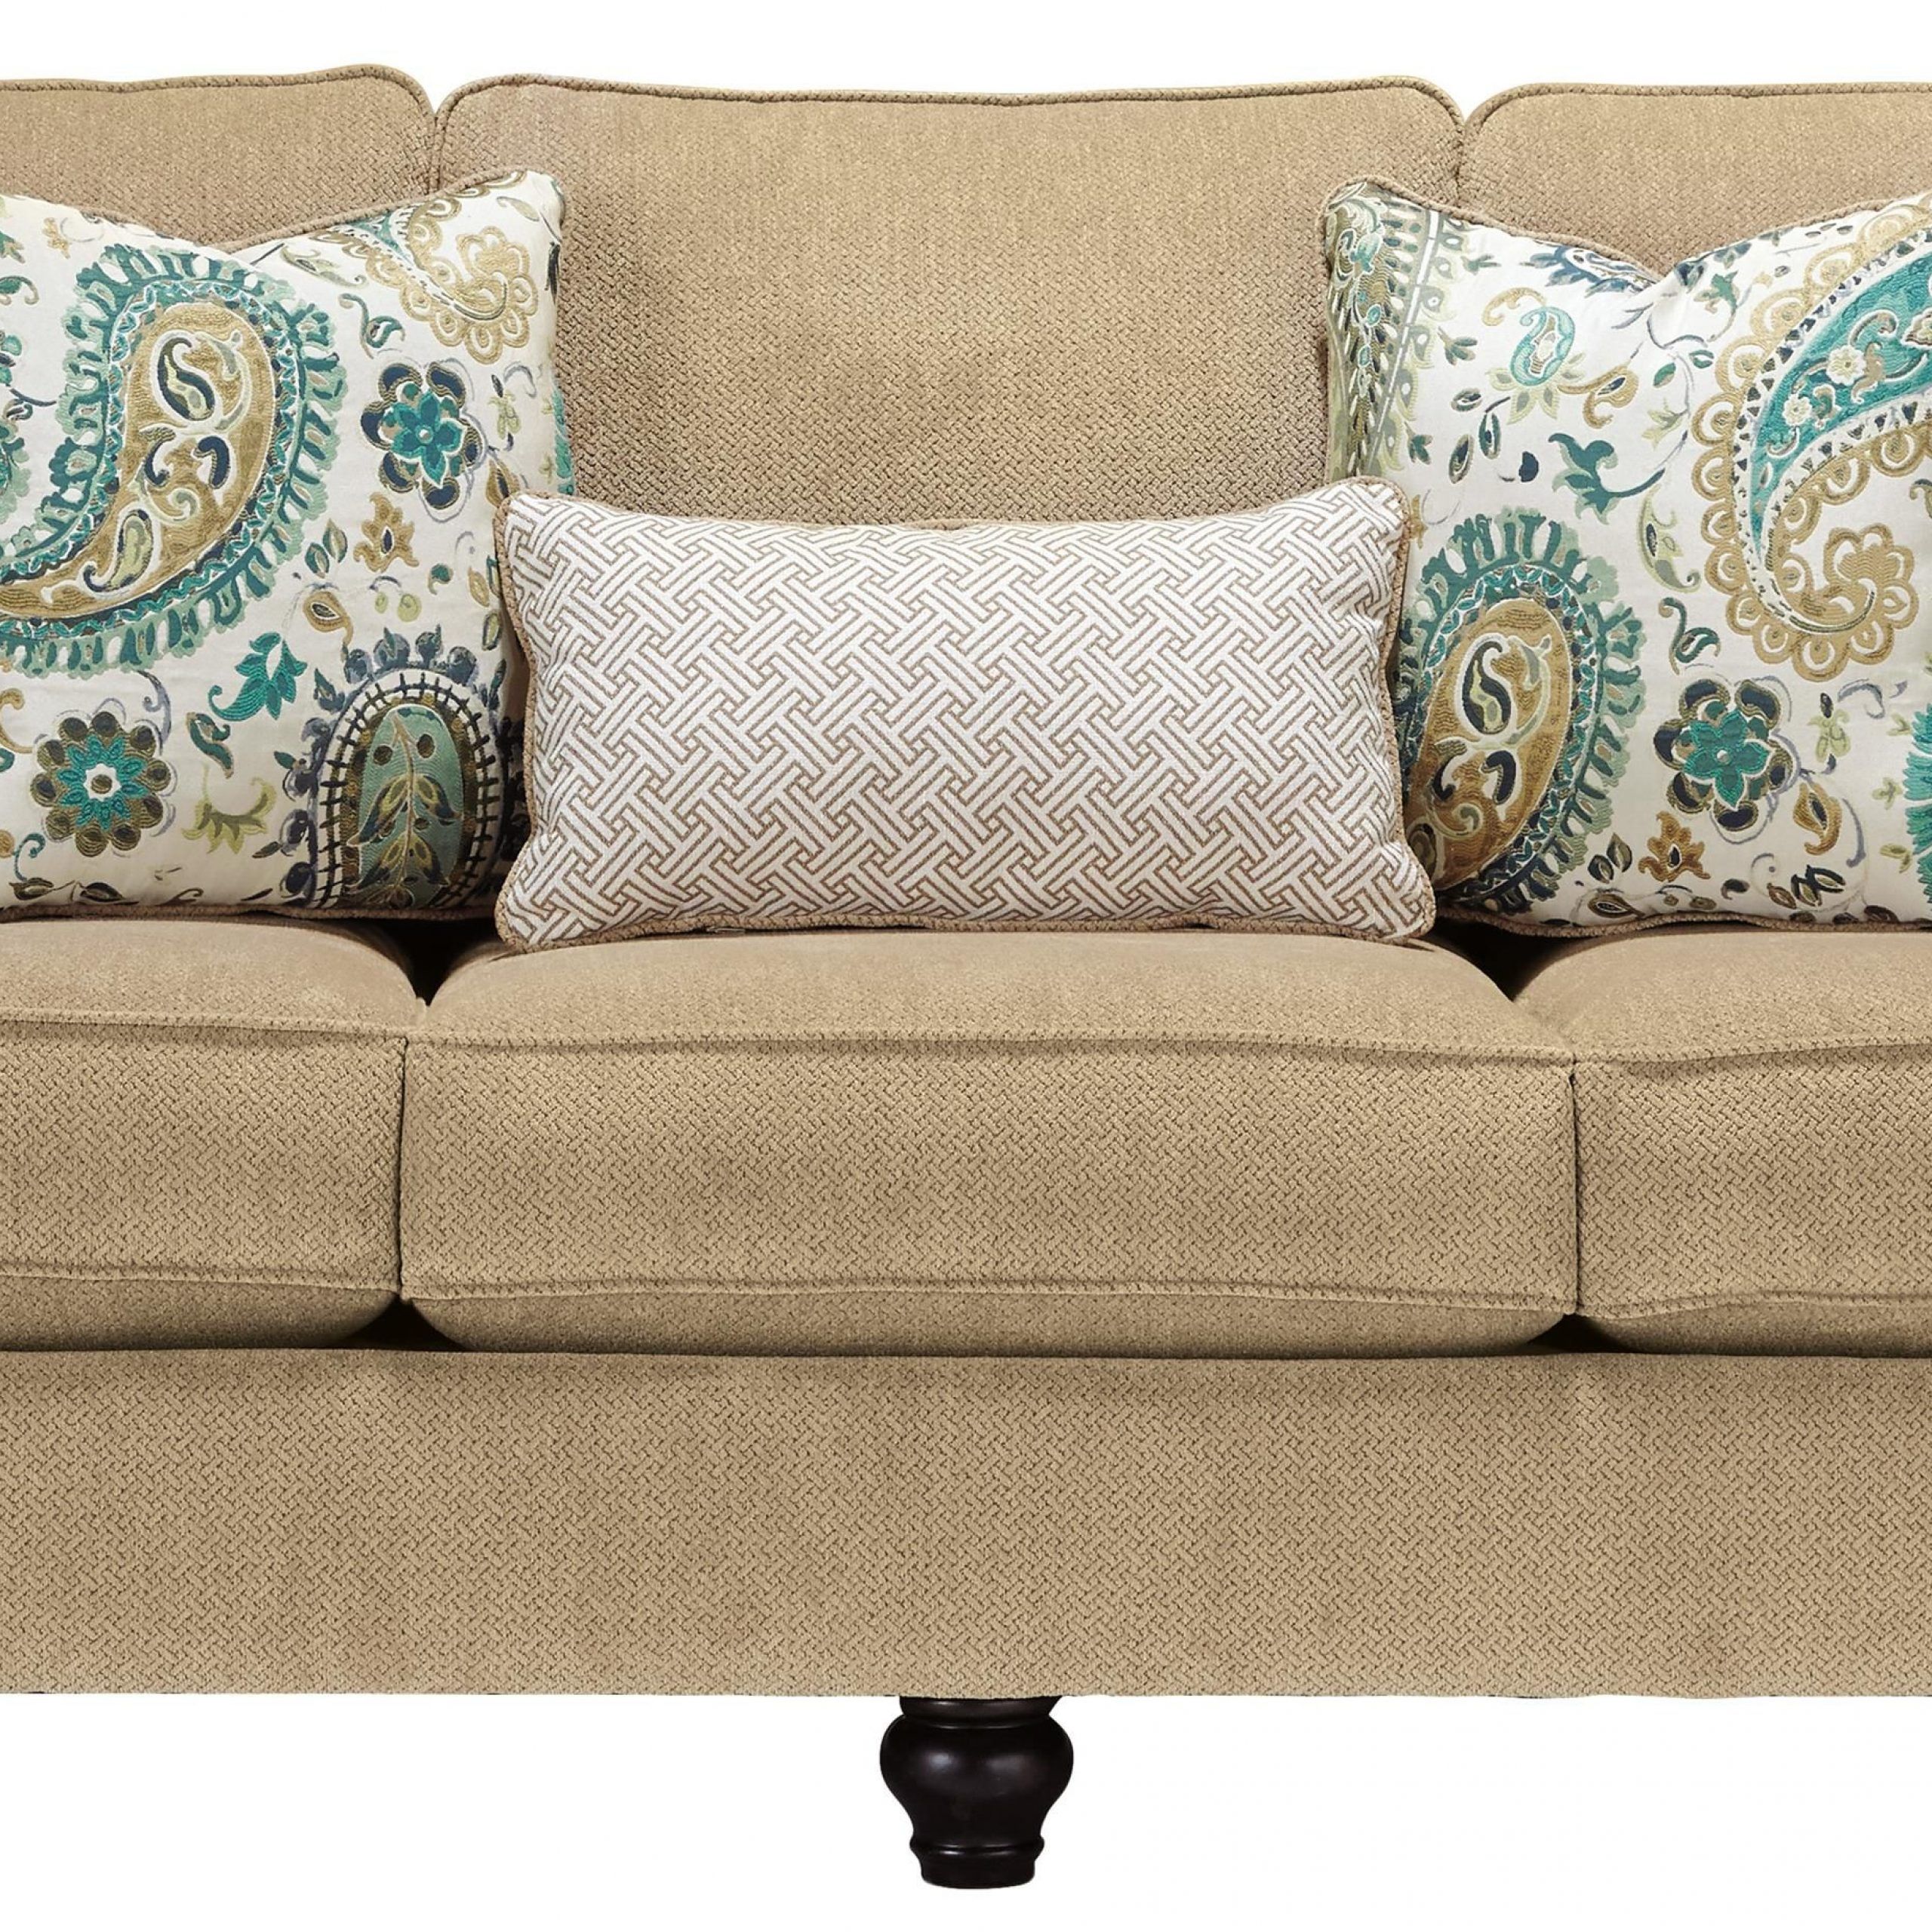 Lochian Sofa With Reversible Coil Seat Cushions & English Throughout Debbie Coil Sectional Futon Sofas (View 14 of 15)